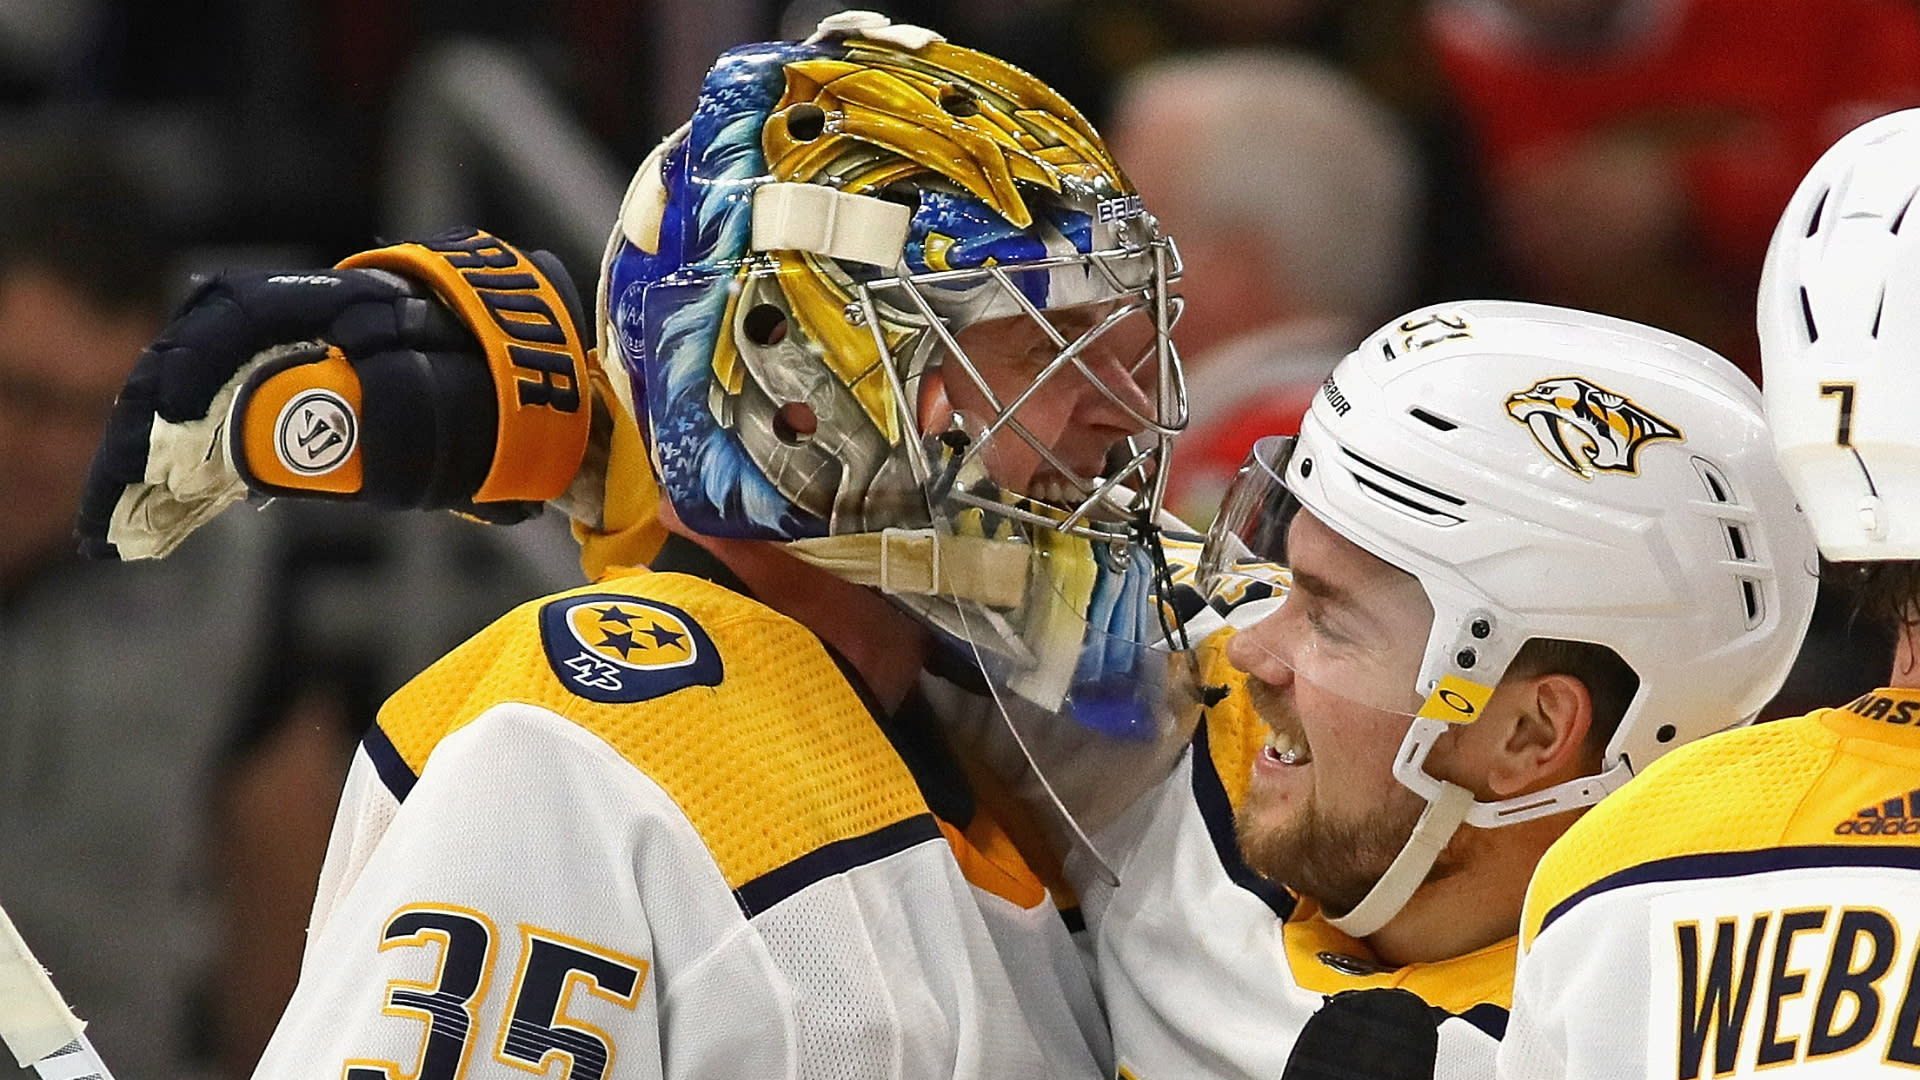 Rinne first goalie to score in NHL 